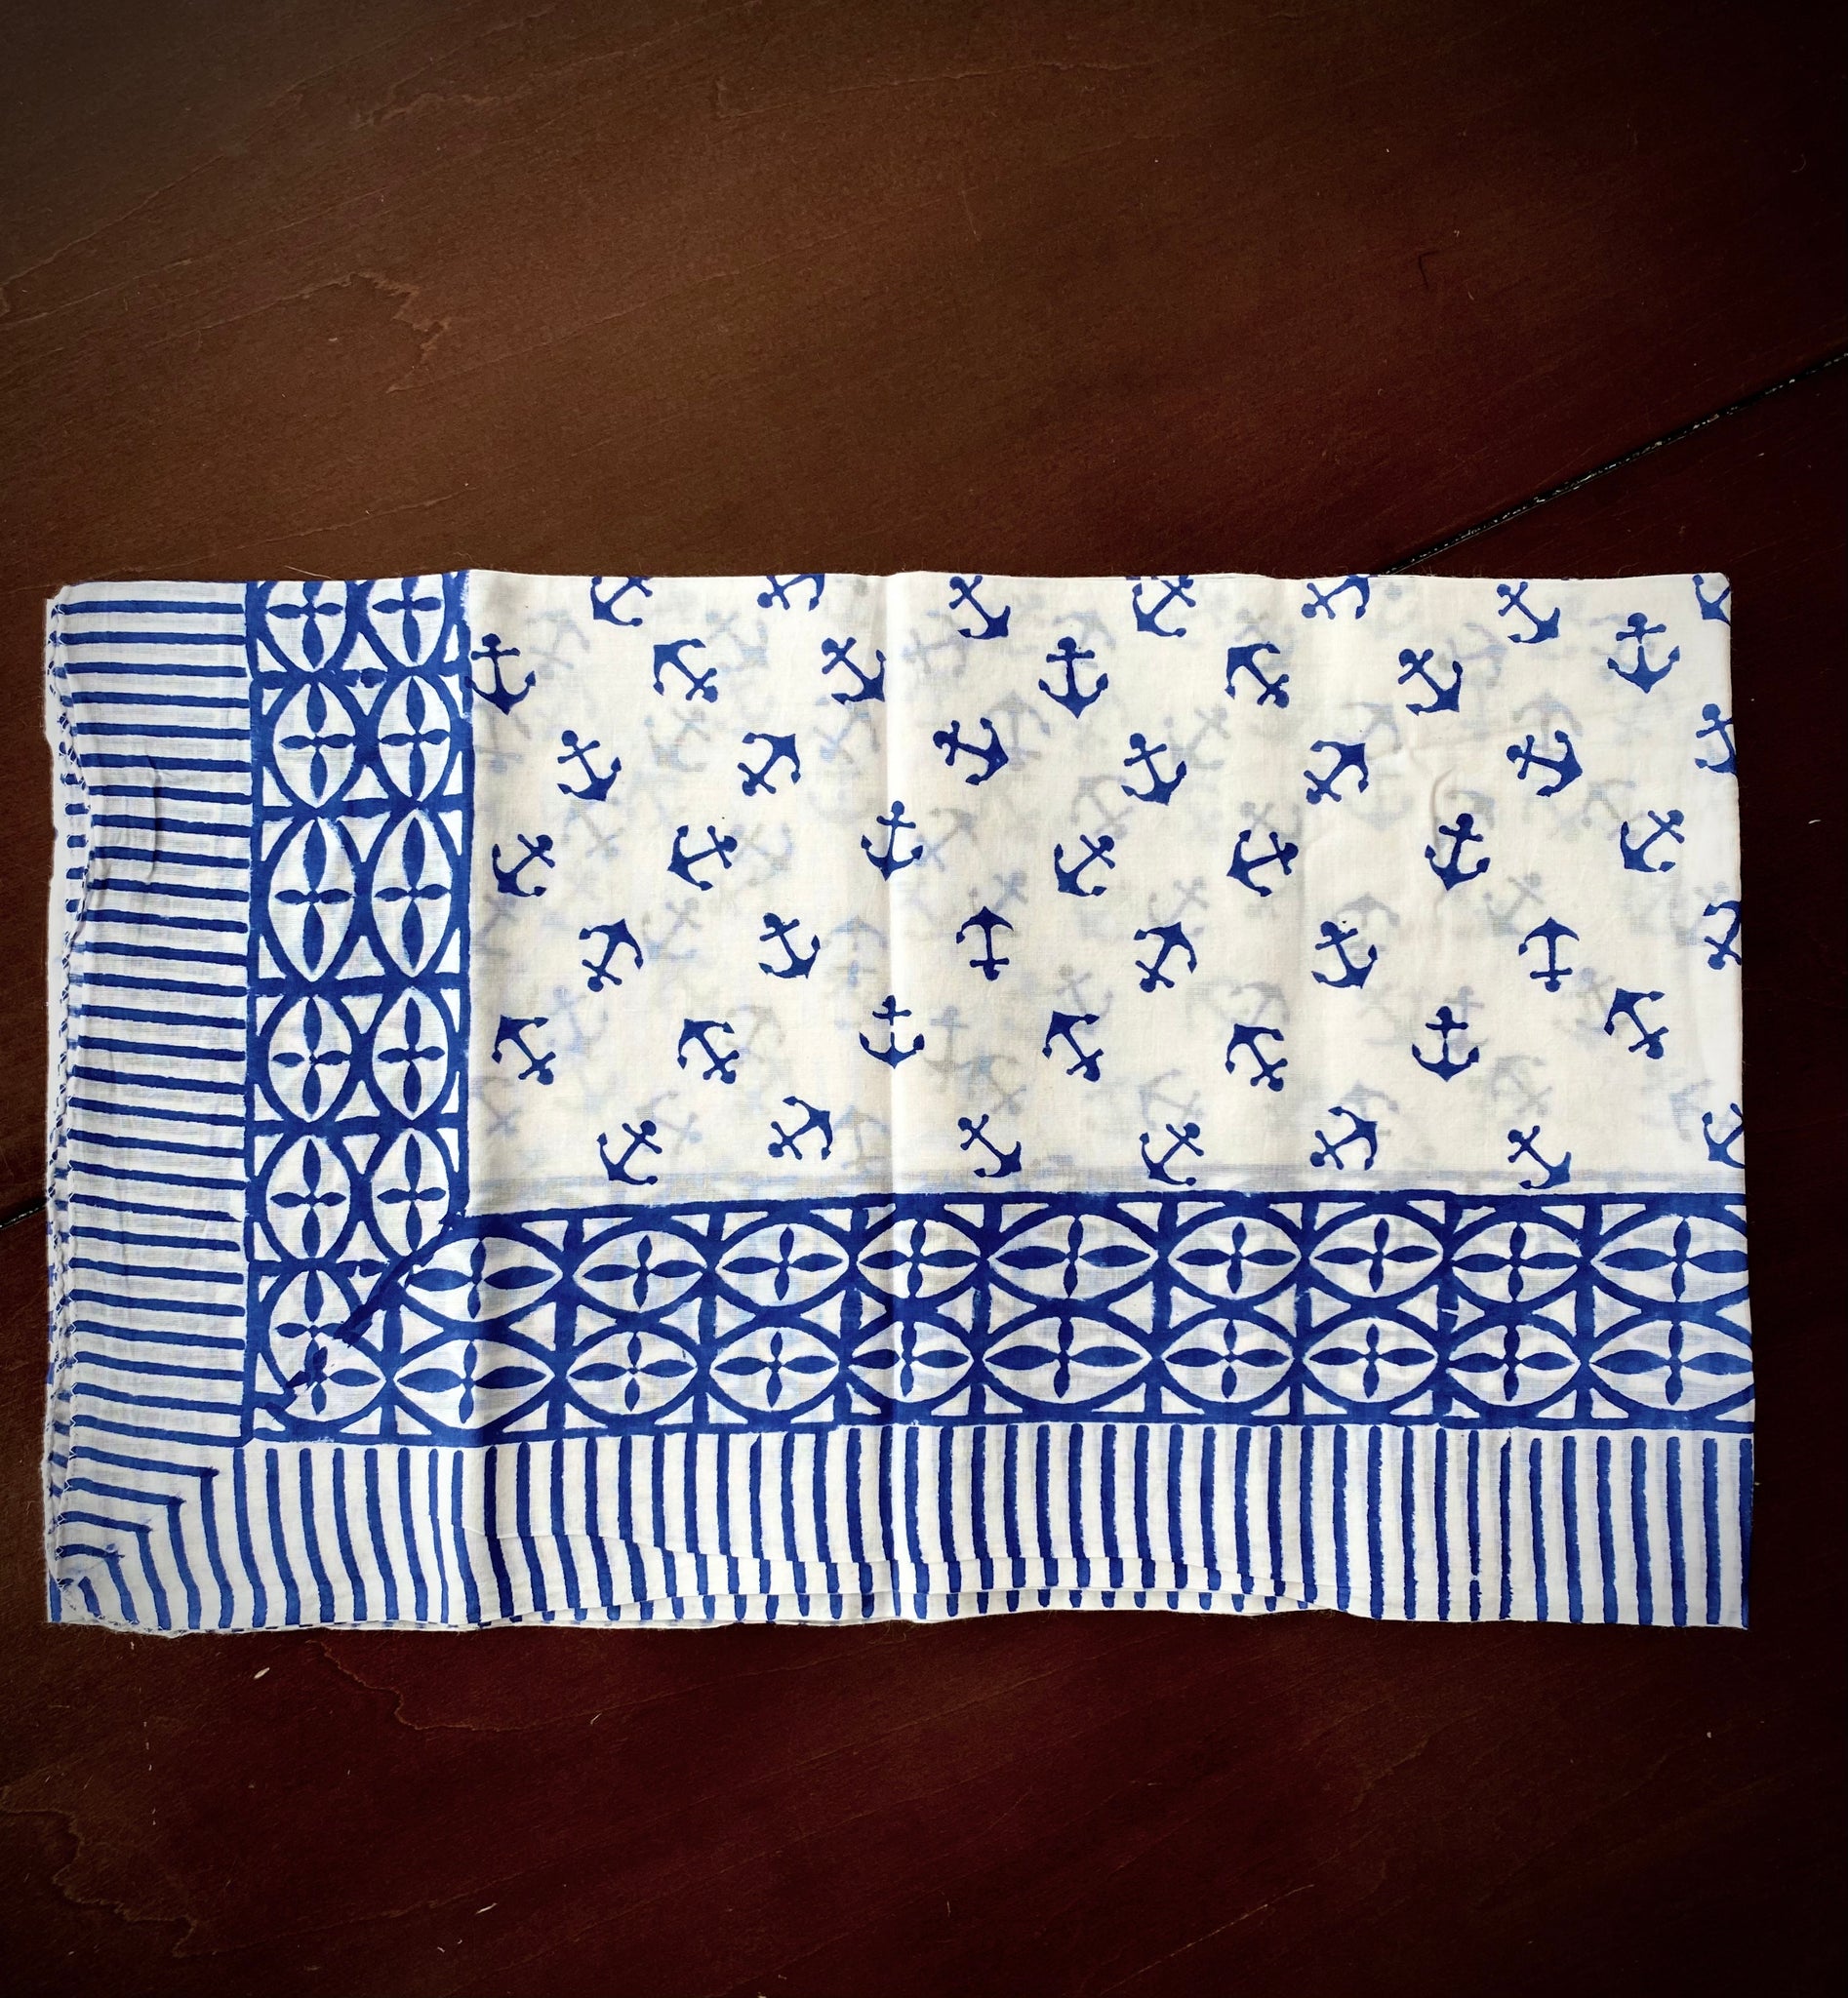 Unique sarongs. Blue and white anchor pattern.